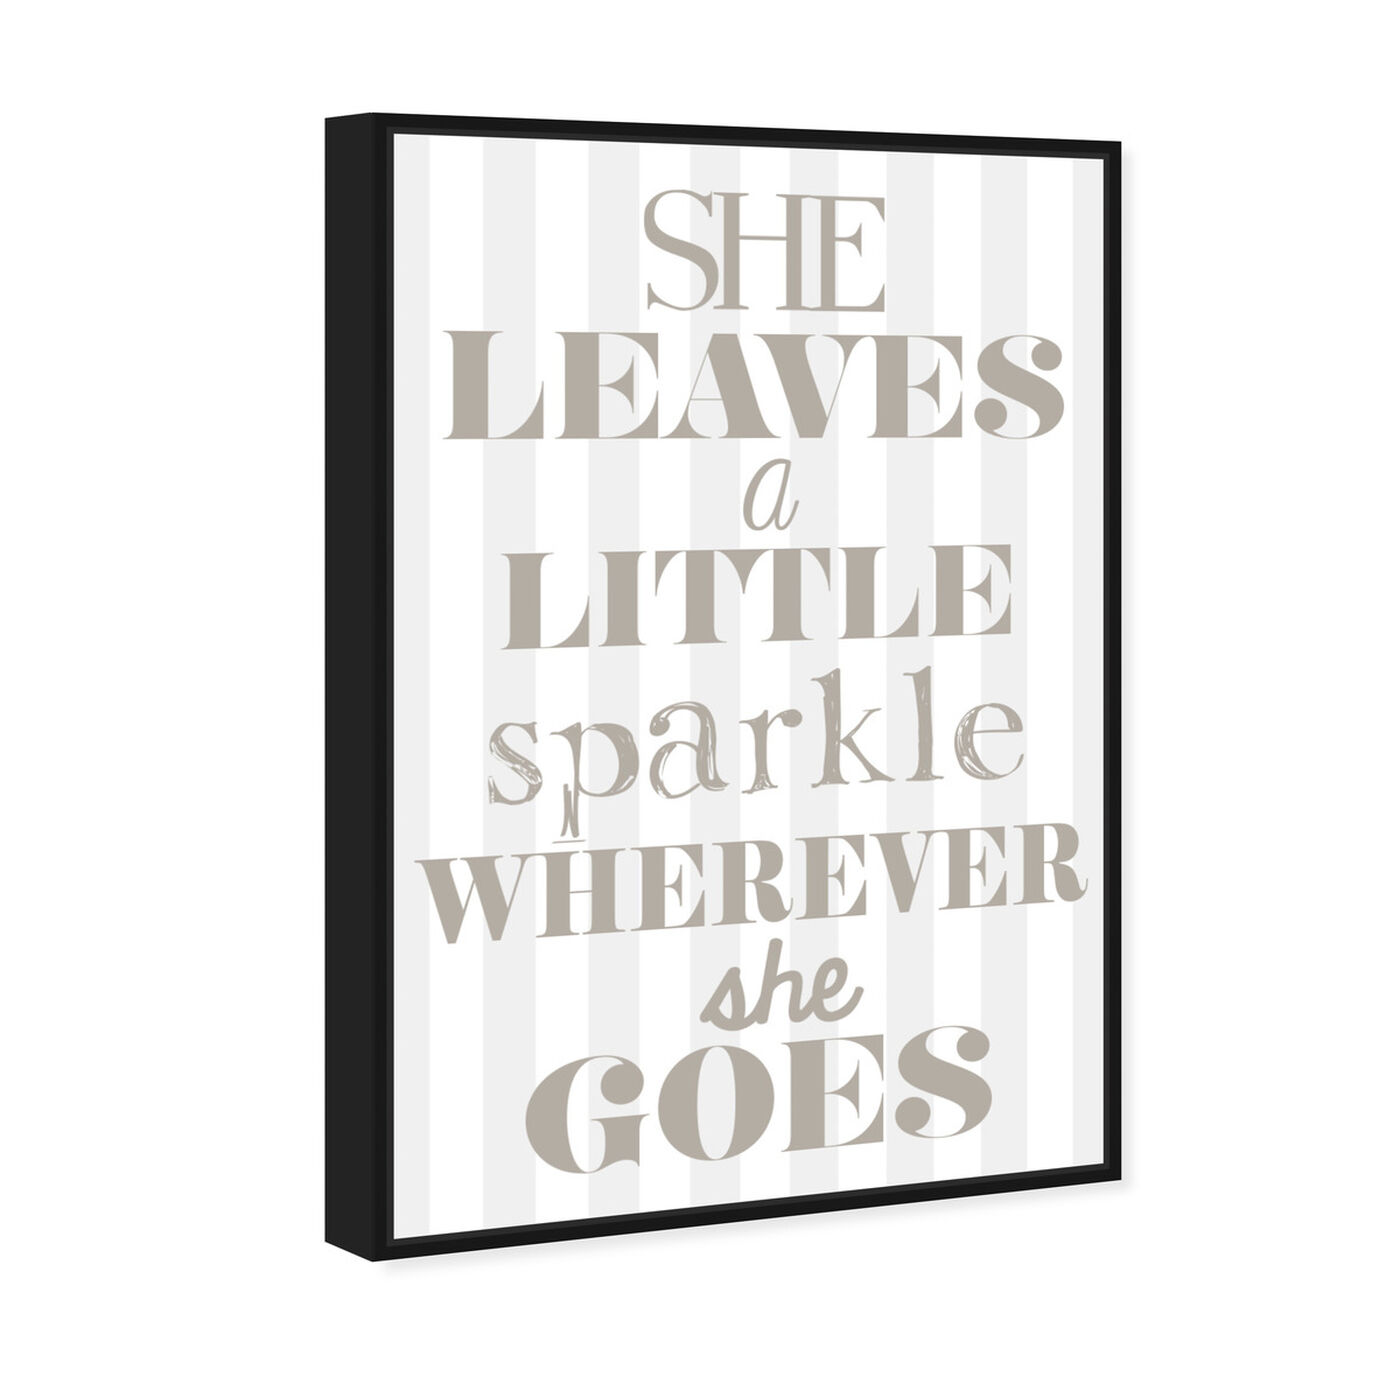 Angled view of Little Sparkle featuring typography and quotes and beauty quotes and sayings art.